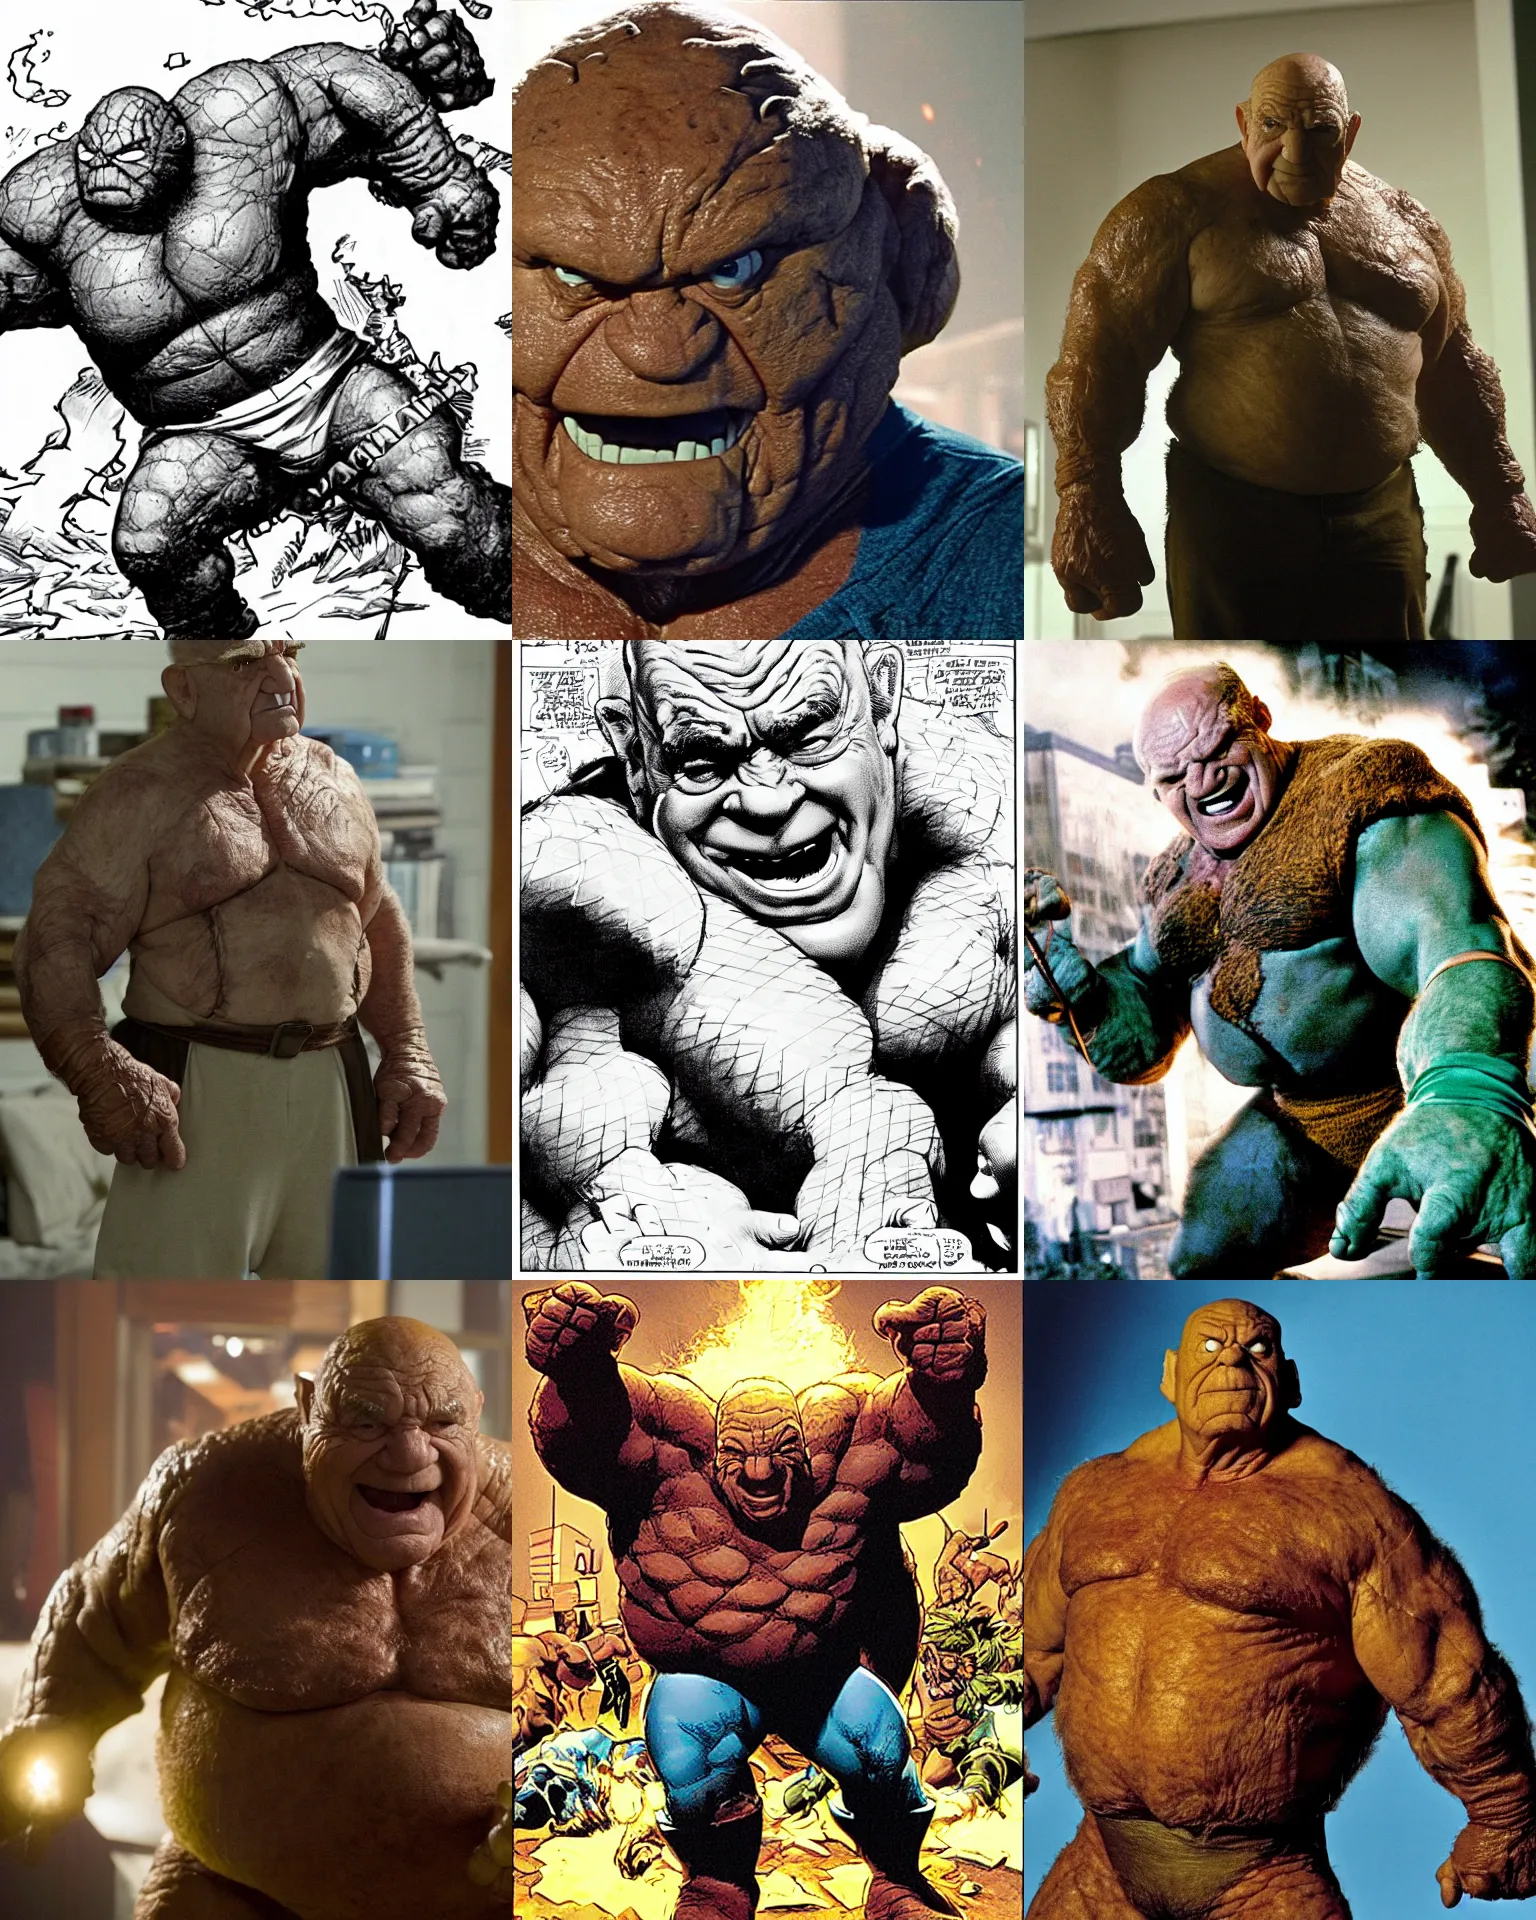 Prompt: Ed Asner starring as Ben Grimm, The Thing from The Fantastic Four Movie, battles the Hulk, Color, Modern